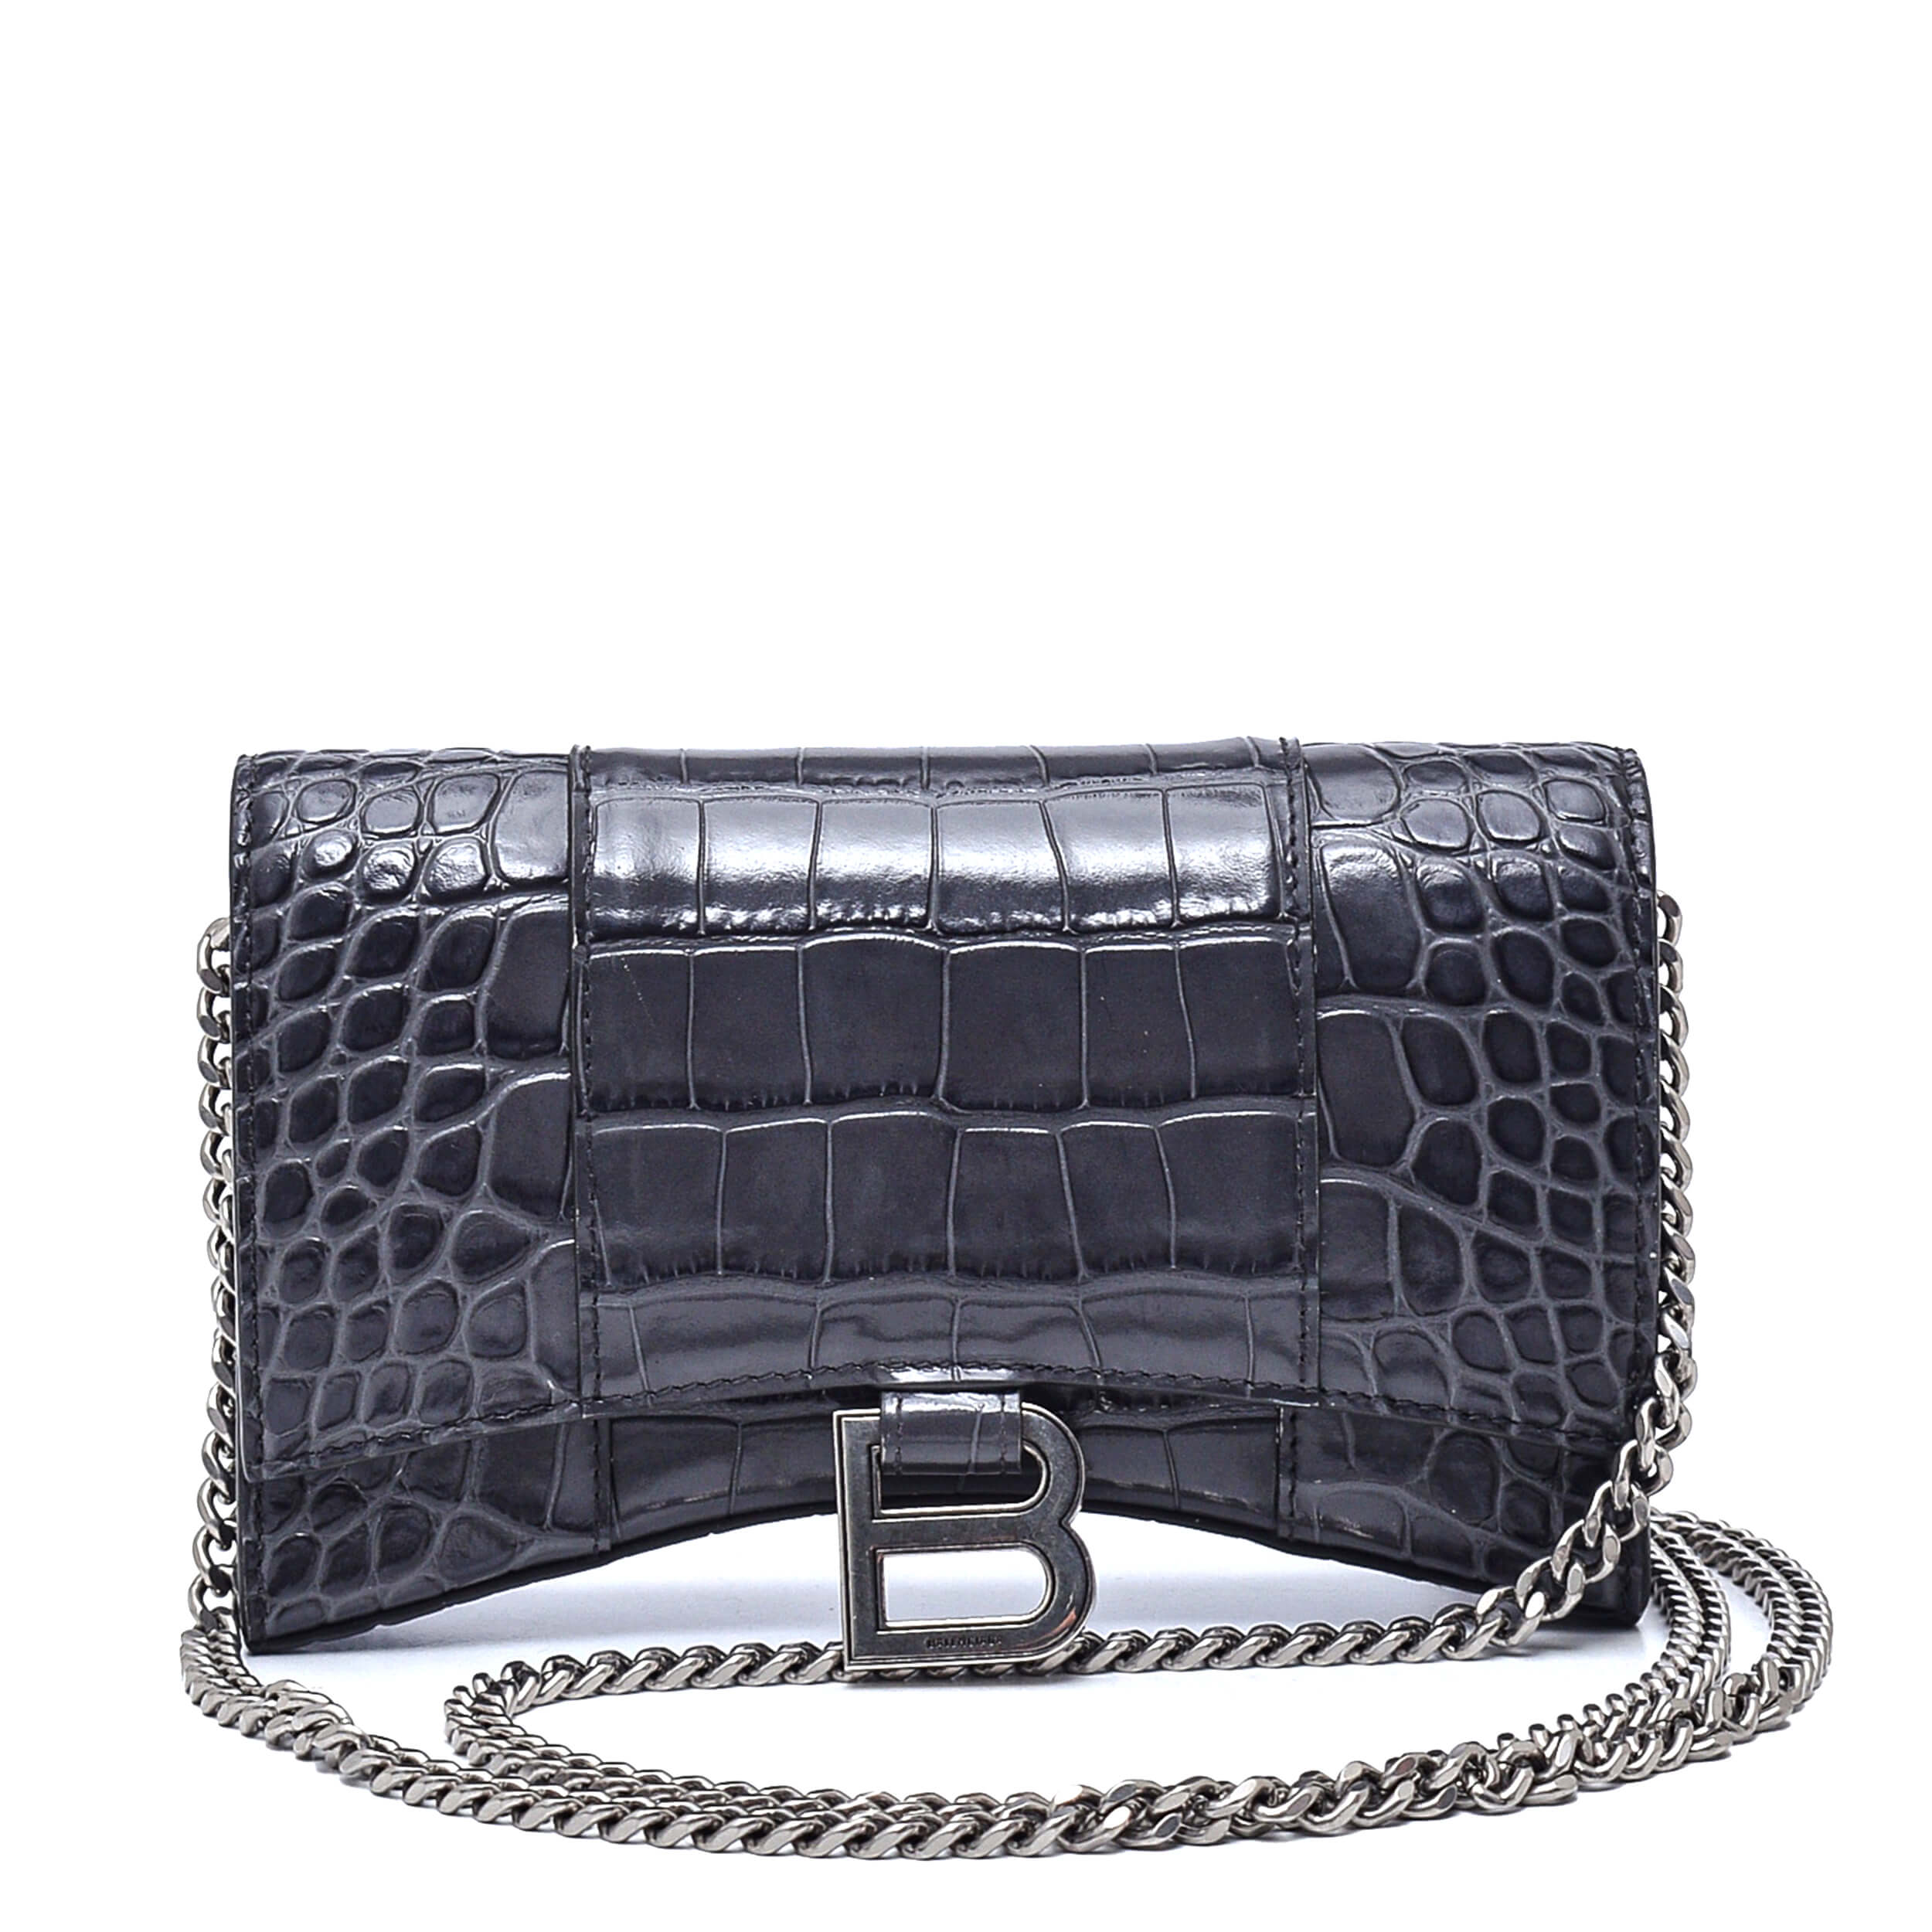 Balenciaga - Anthracite Croco Print Leather Hourglass Wallet on Chain Bag 